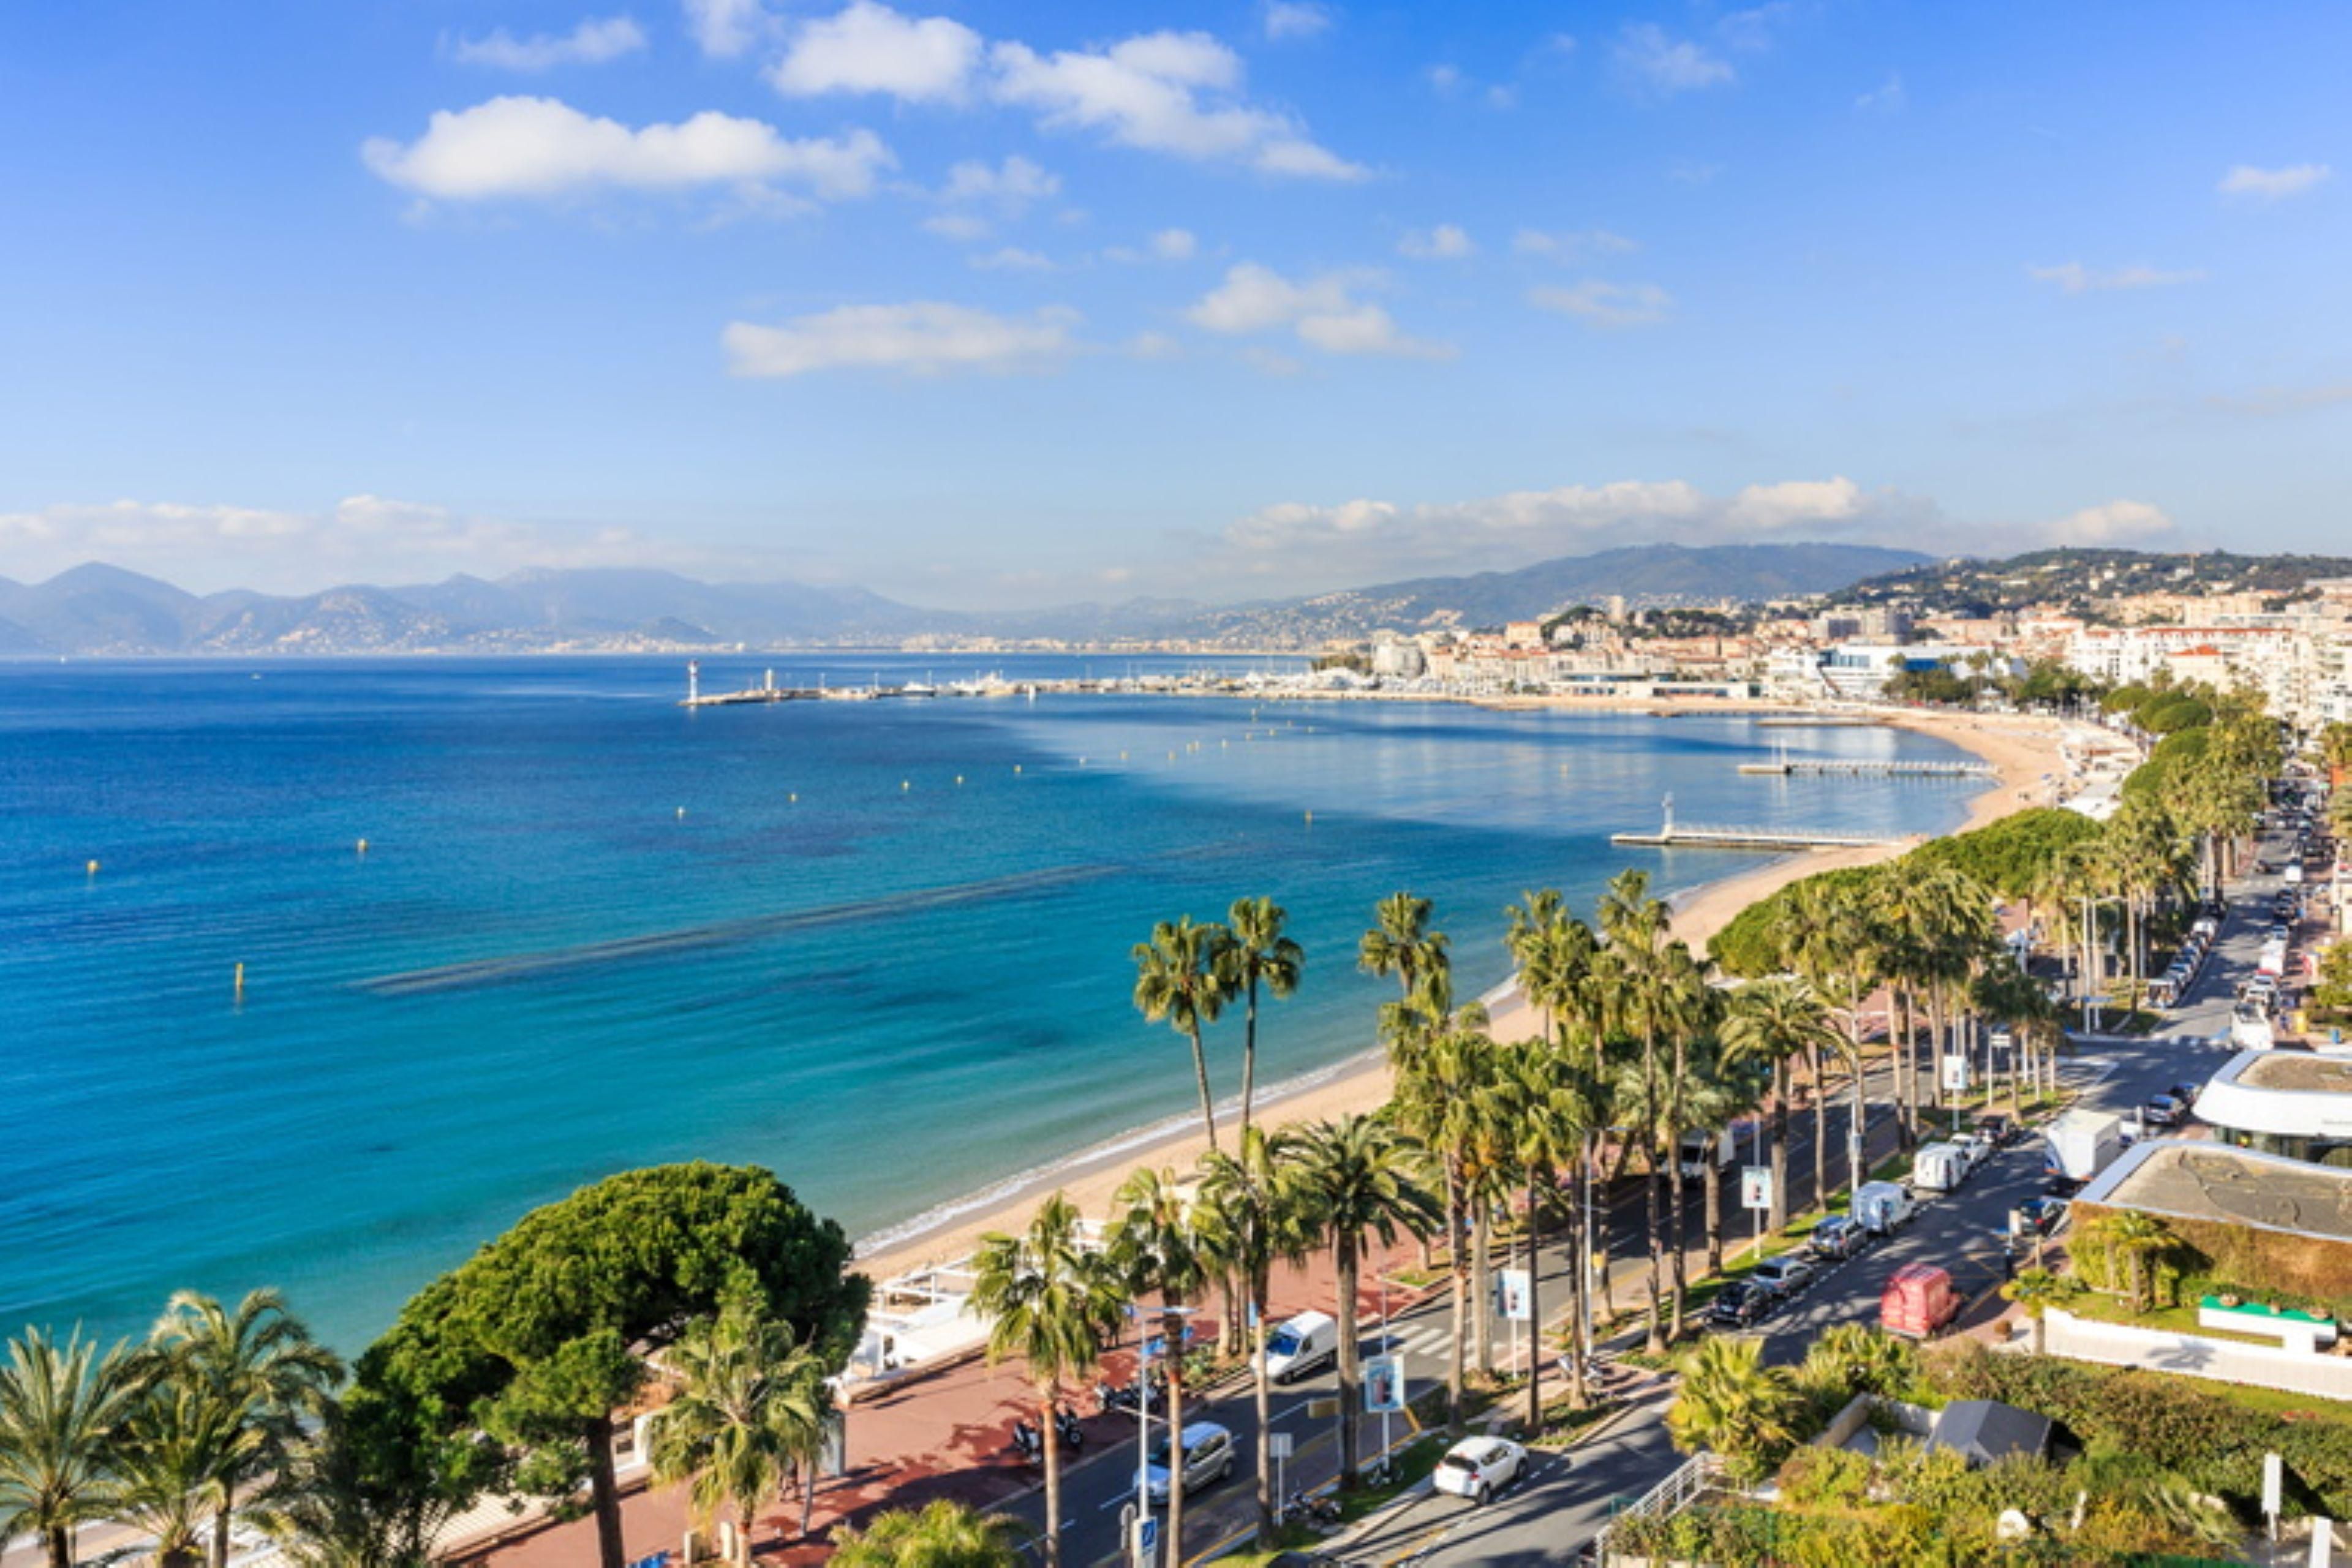 At less than 10 minutes away, enjoy a walk along the famous Croisette or relax on the beach!
You can also do some shopping in the city center or grab some food in a large choice of restaurant.